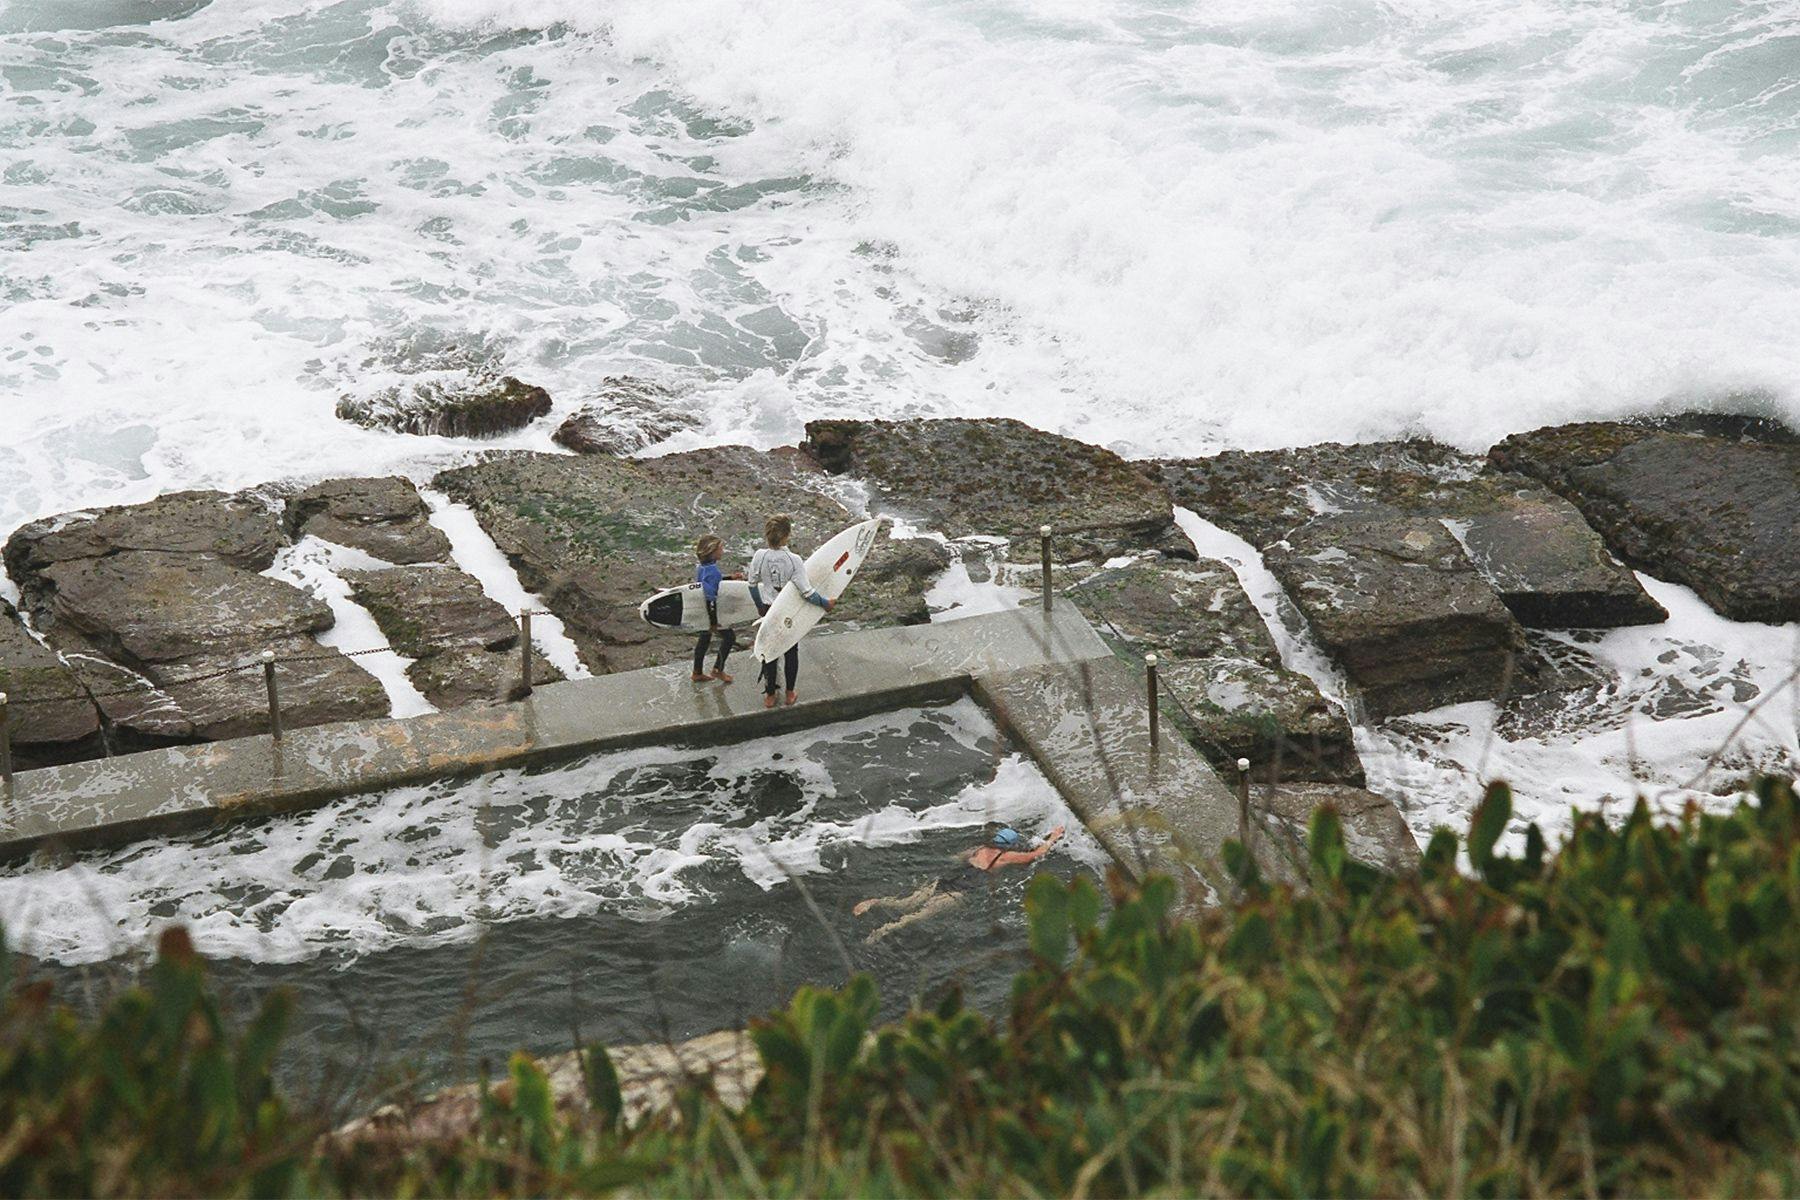 two young surfers wait by the edge of a tidal pool with a swimmer doing laps, ready to jump into the surf